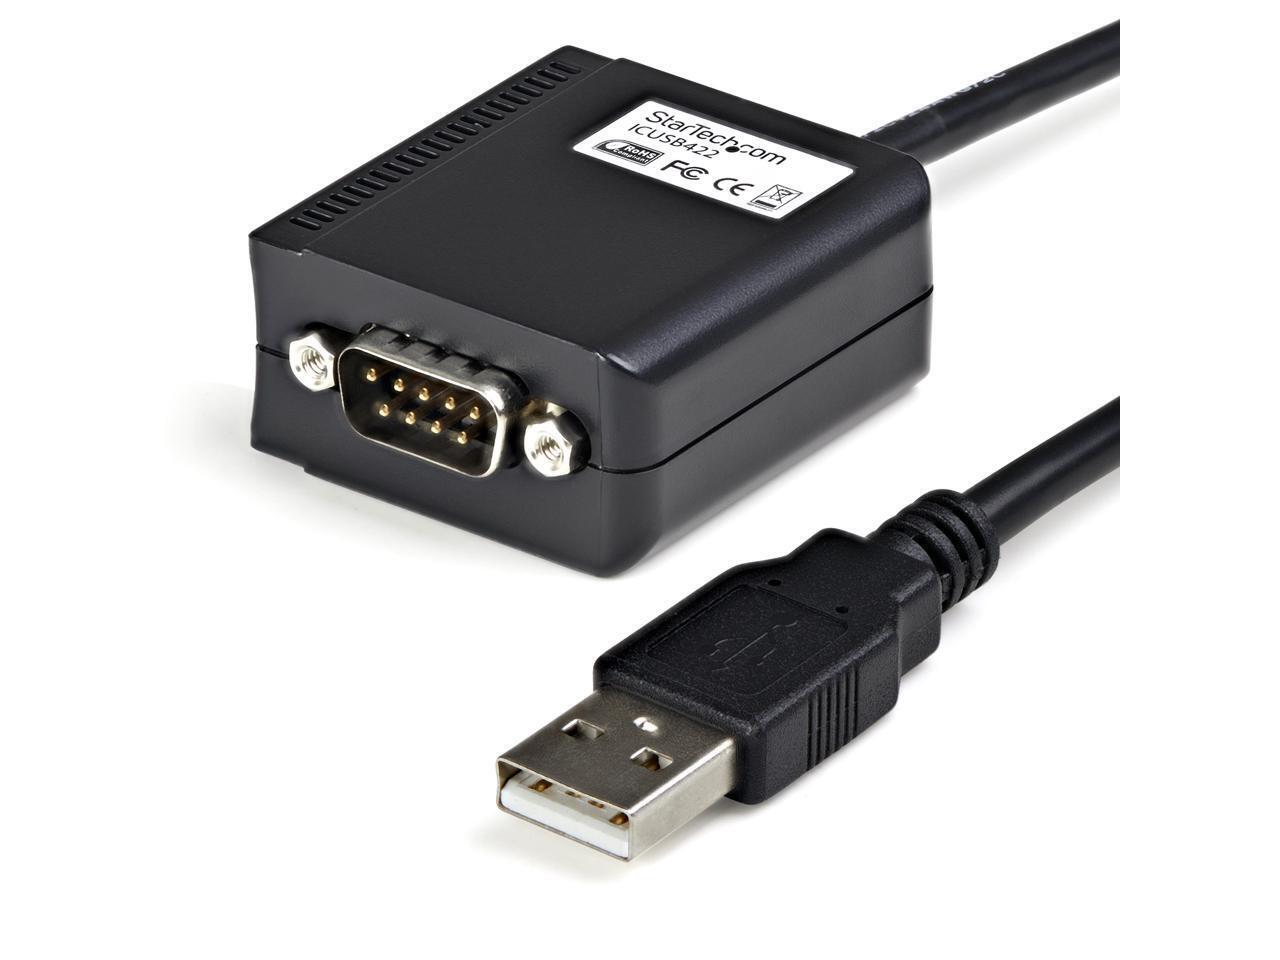 StarTech.com Model ICUSB422 6 ft. Professional RS422/485 USB Serial Cable